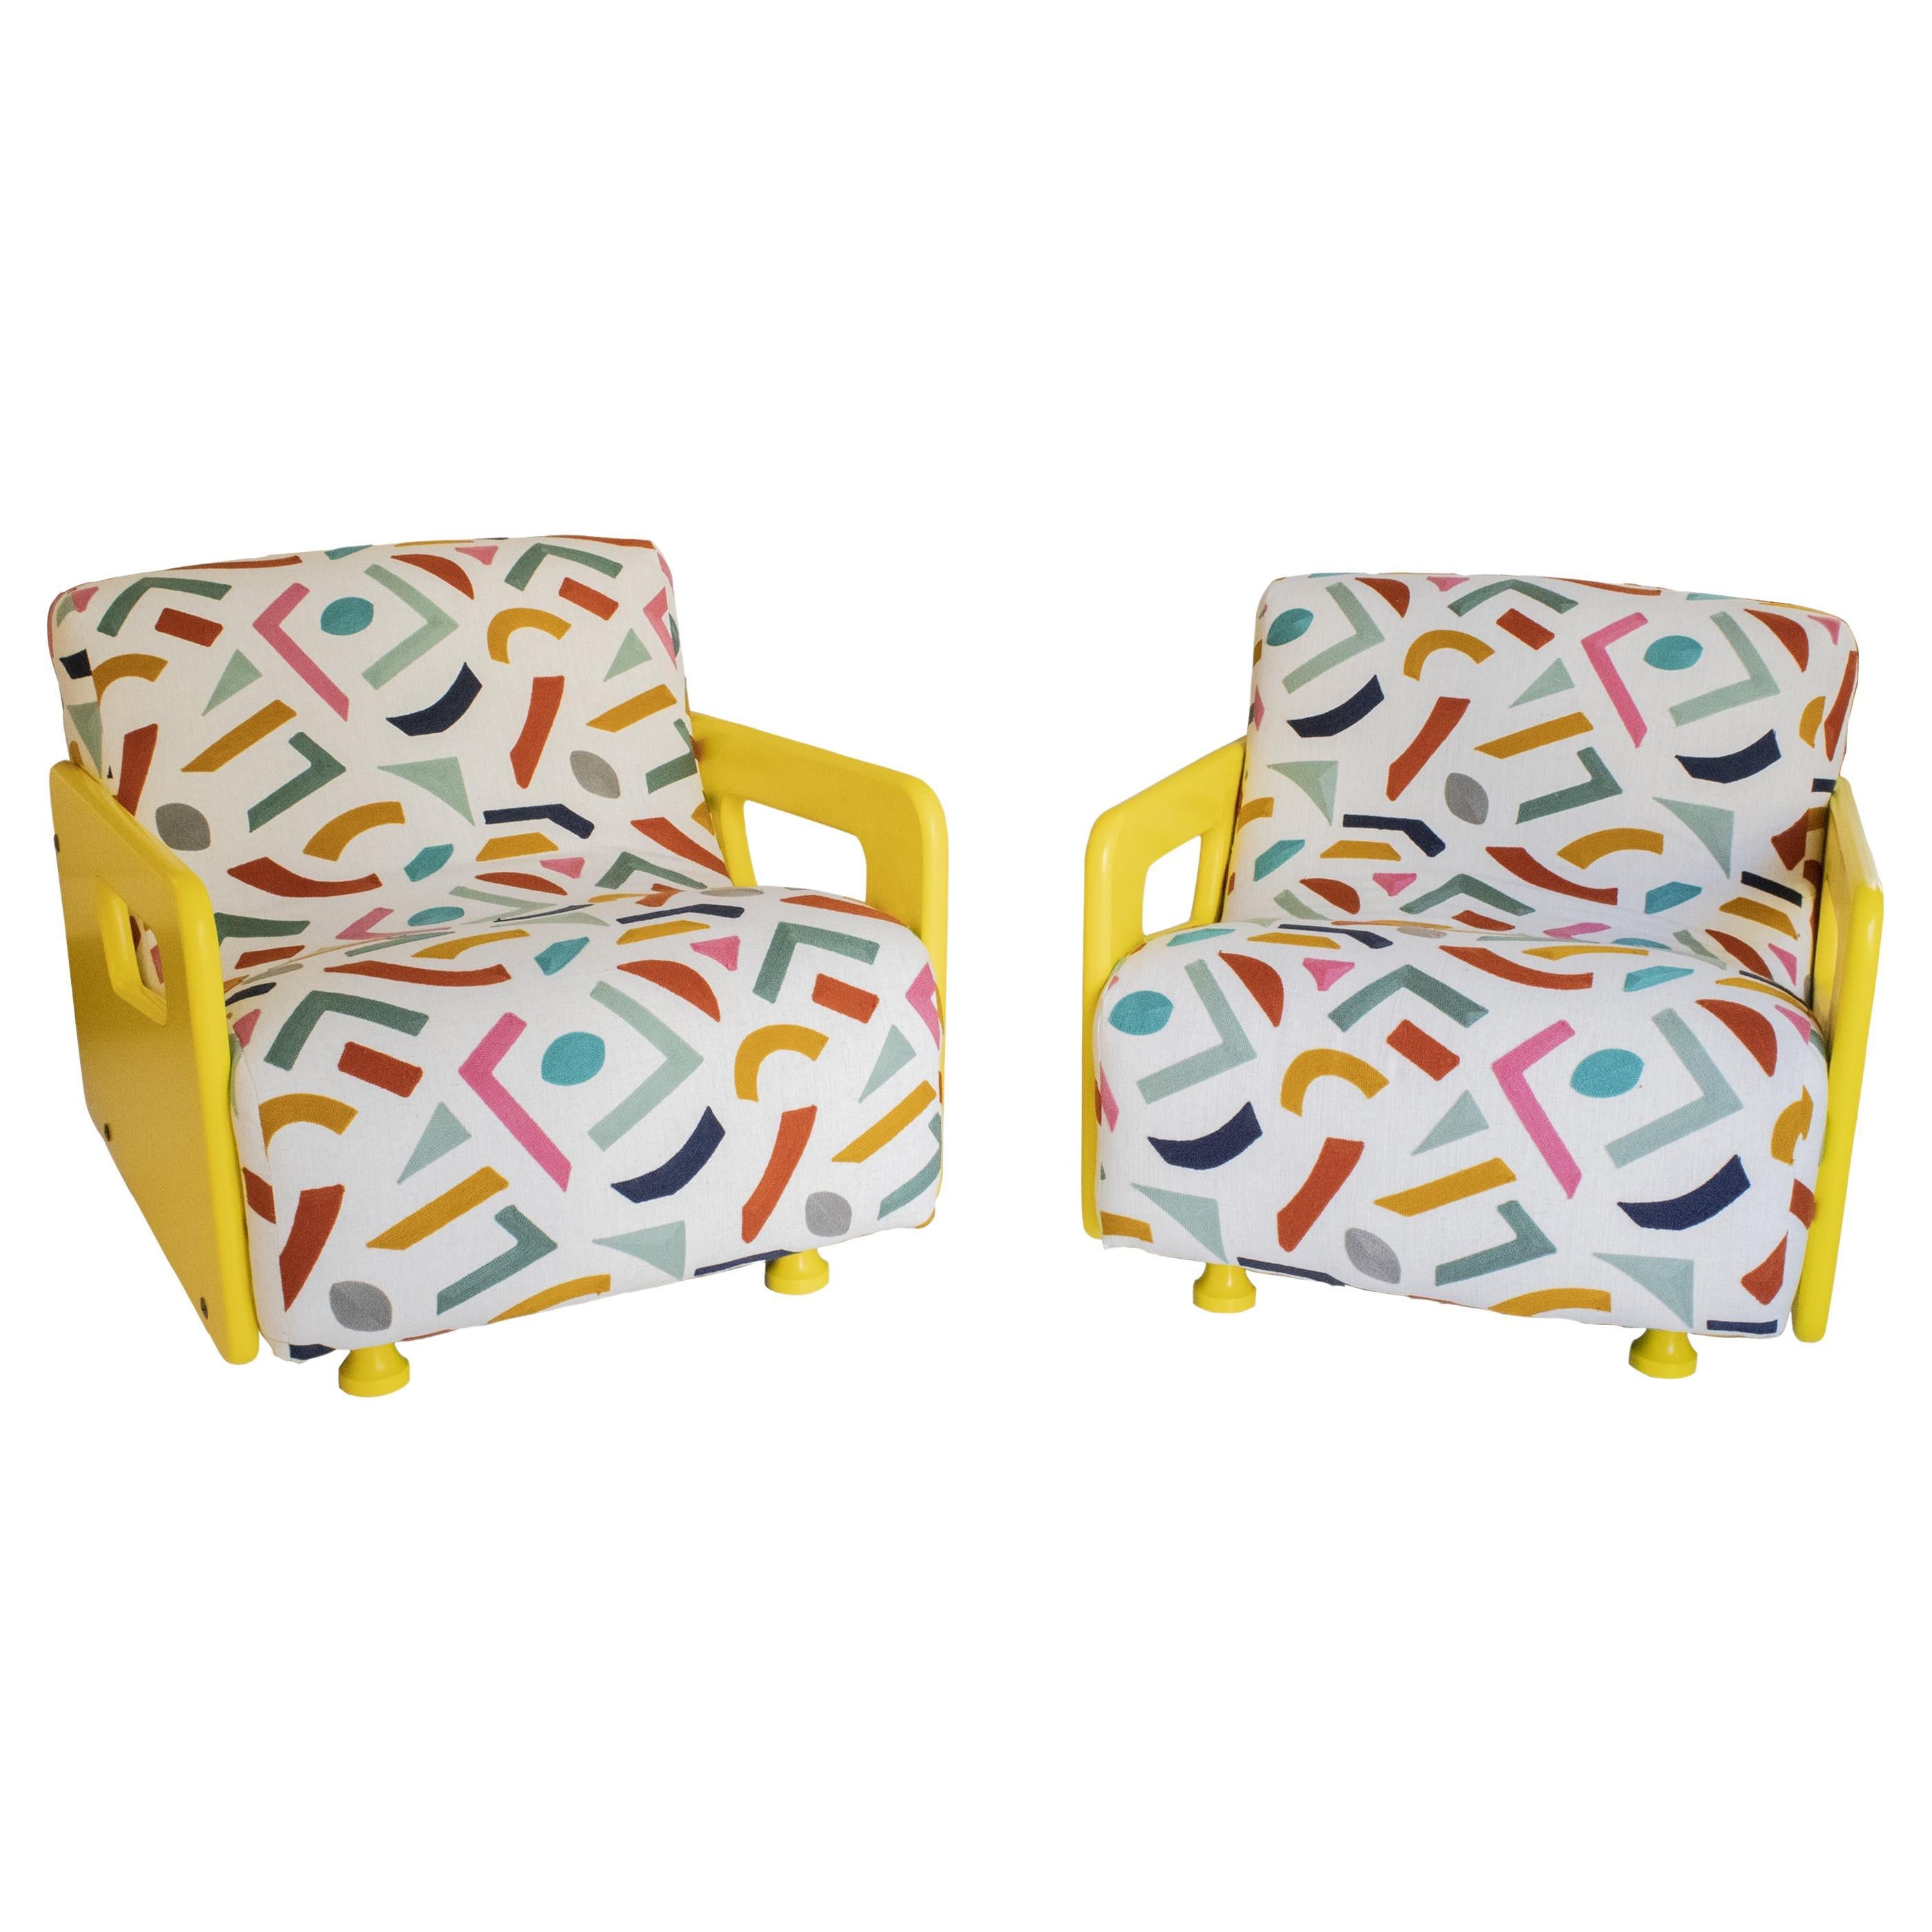 Modern Armchairs with Lacquered Wood and Geometric Upholstery, Italy, 1970 For Sale